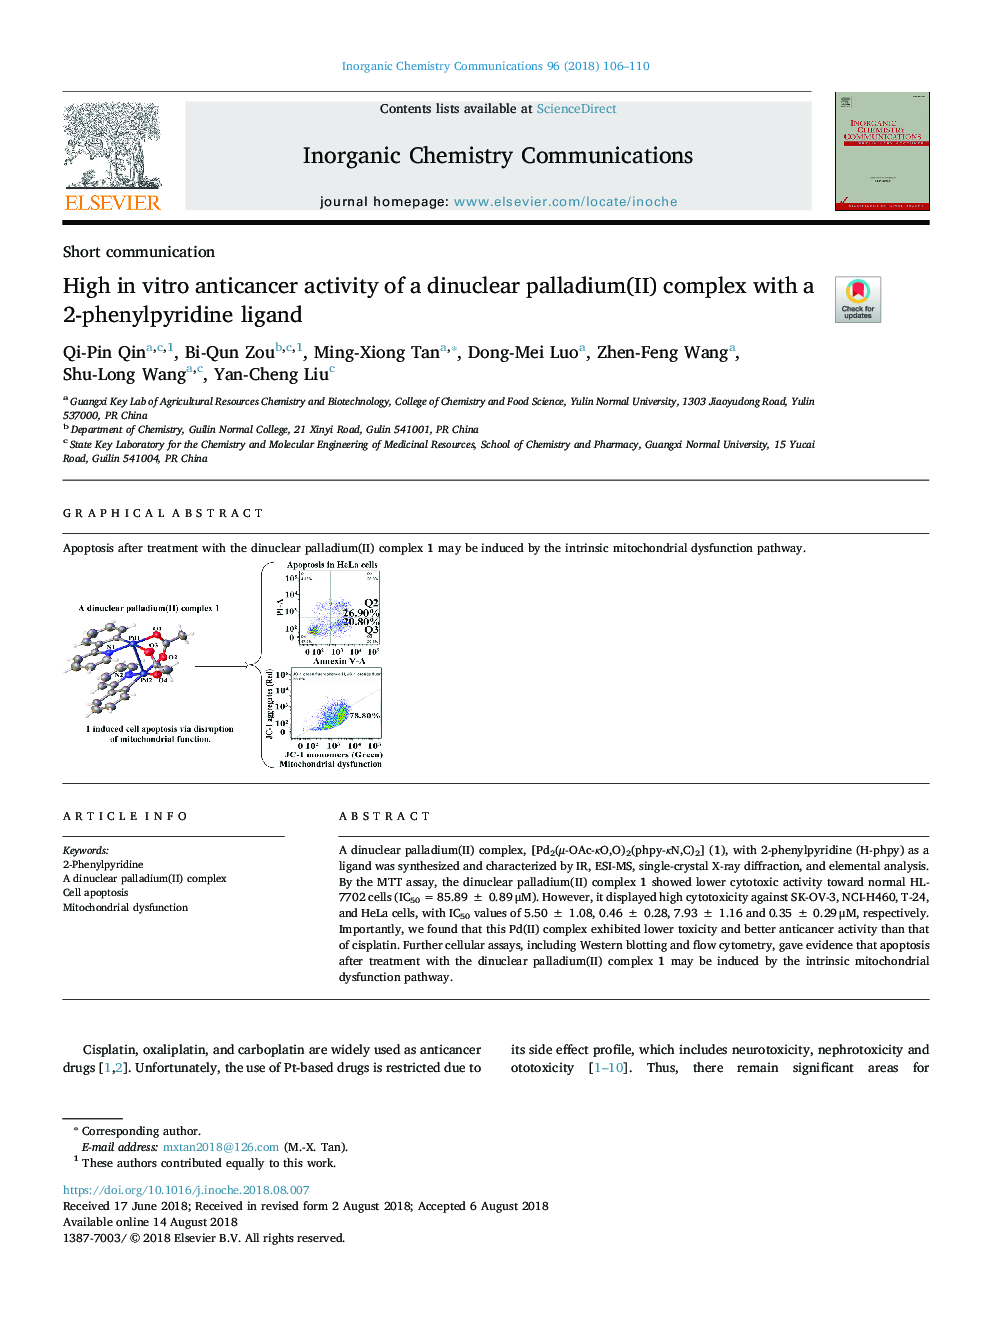 High in vitro anticancer activity of a dinuclear palladium(II) complex with a 2âphenylpyridine ligand